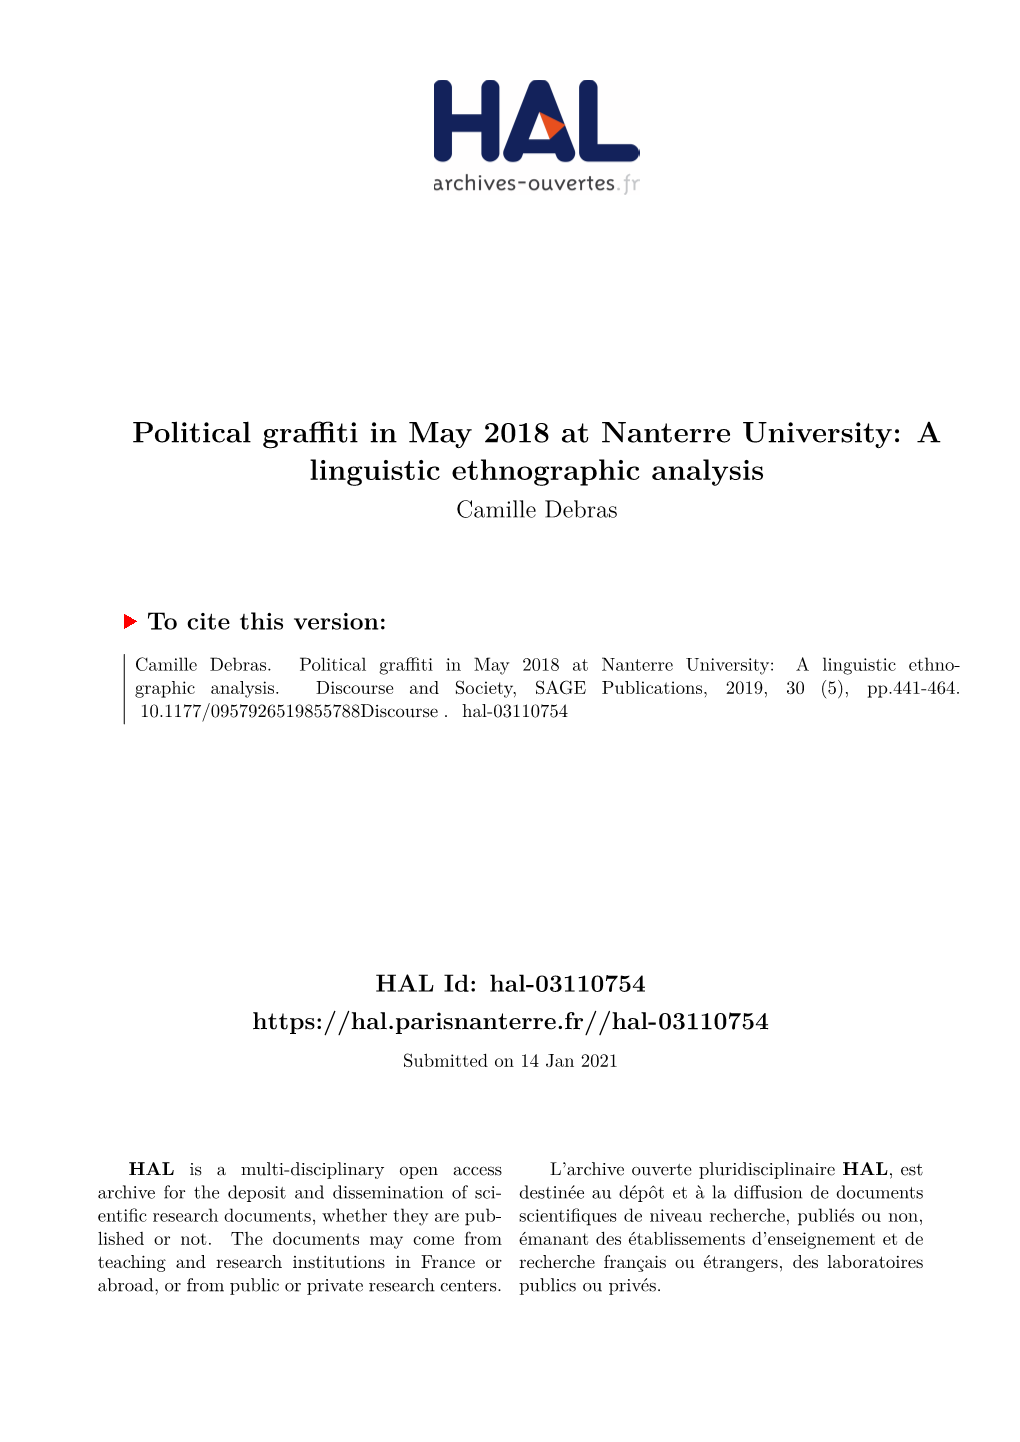 Political Graffiti in May 2018 at Nanterre University: a Linguistic Ethnographic Analysis